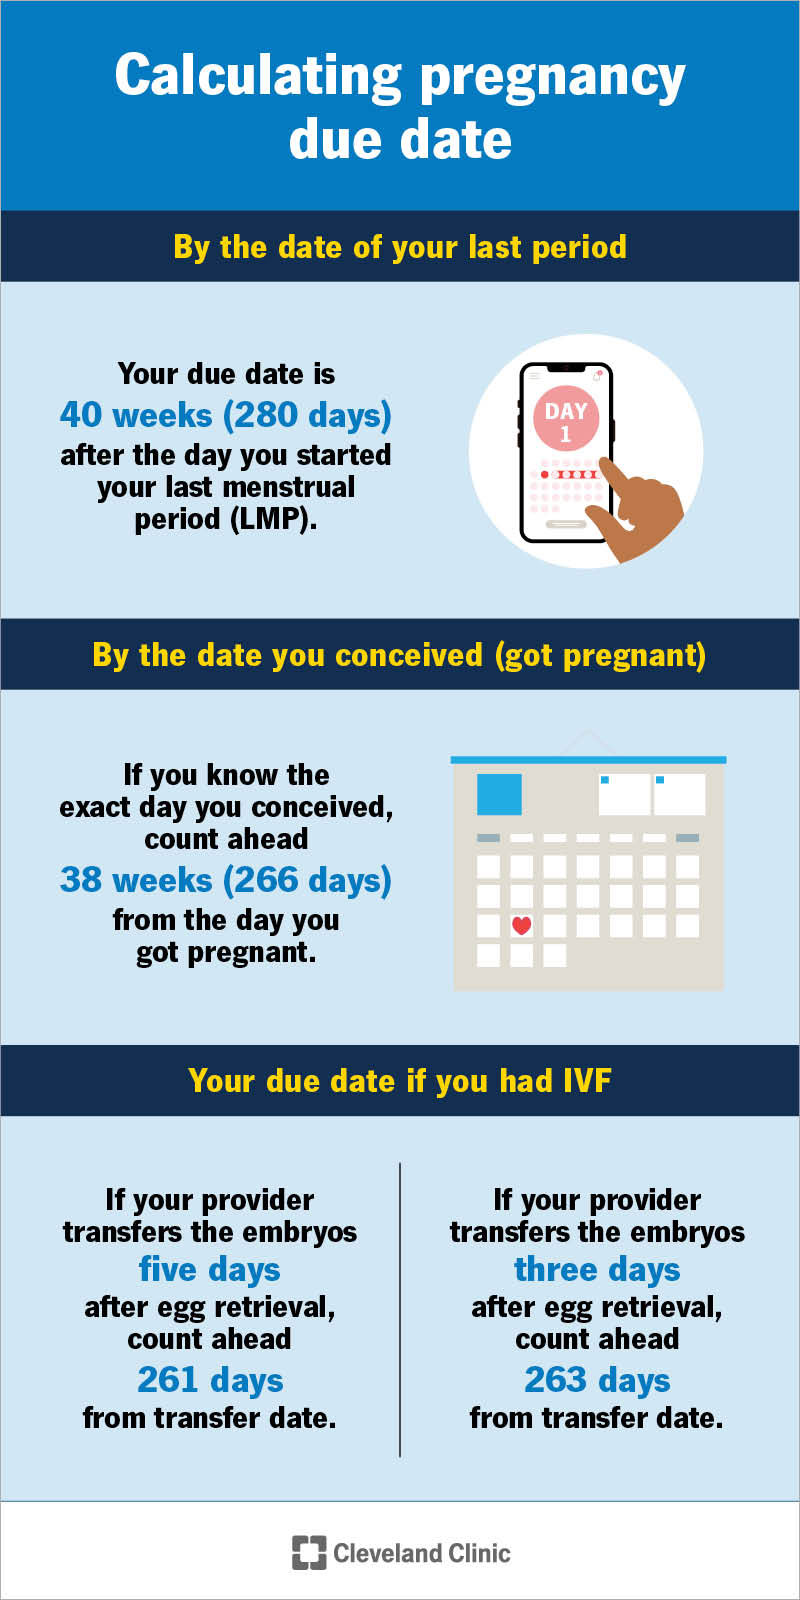 A few ways you can calculate your due date are based on your last period and the day you conceived